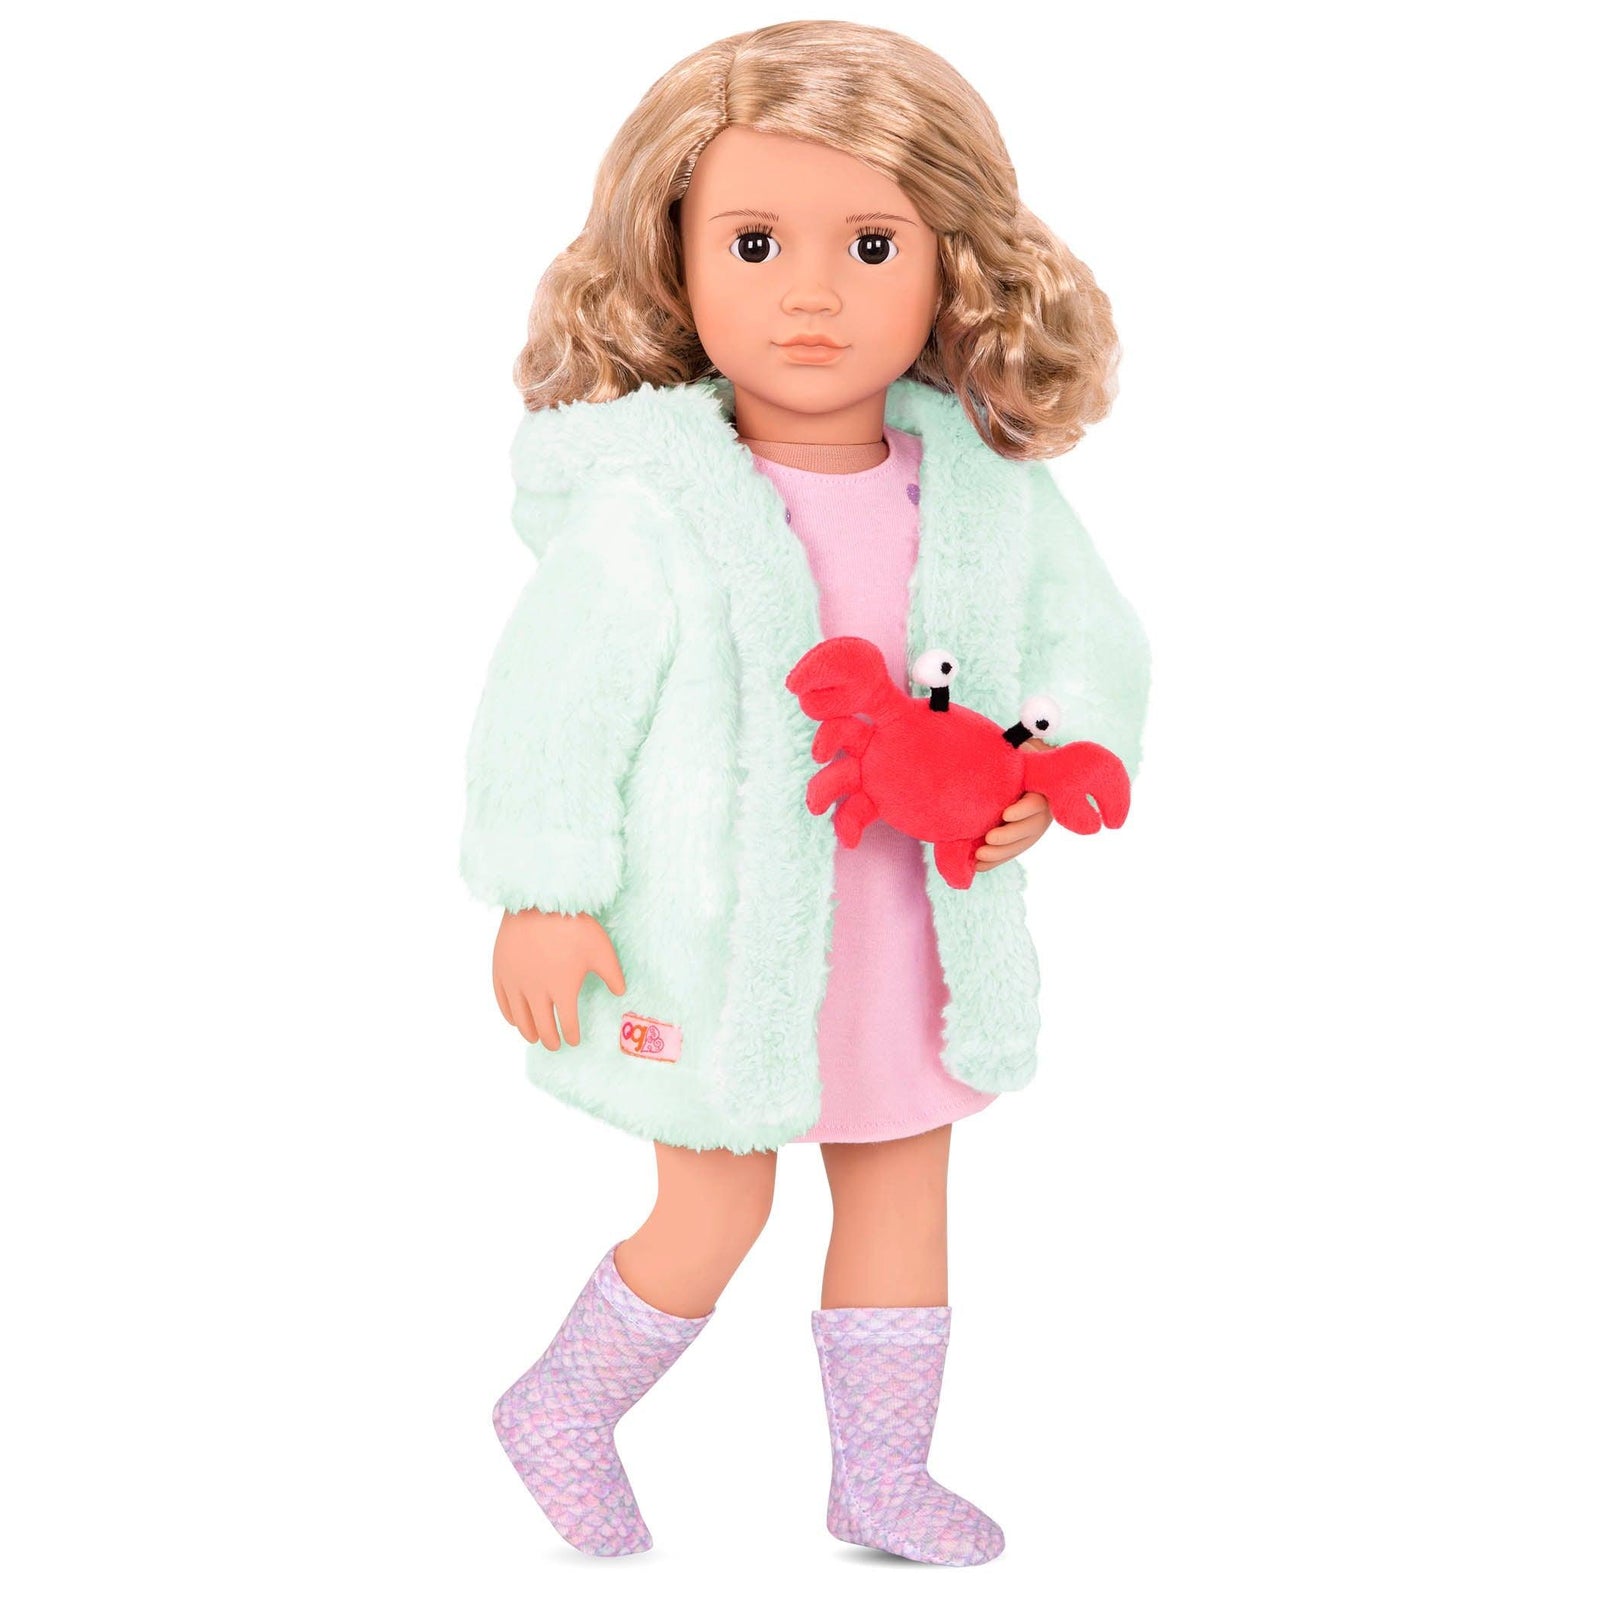 Our Generation: Seaside Dreams robe and pajamas for doll